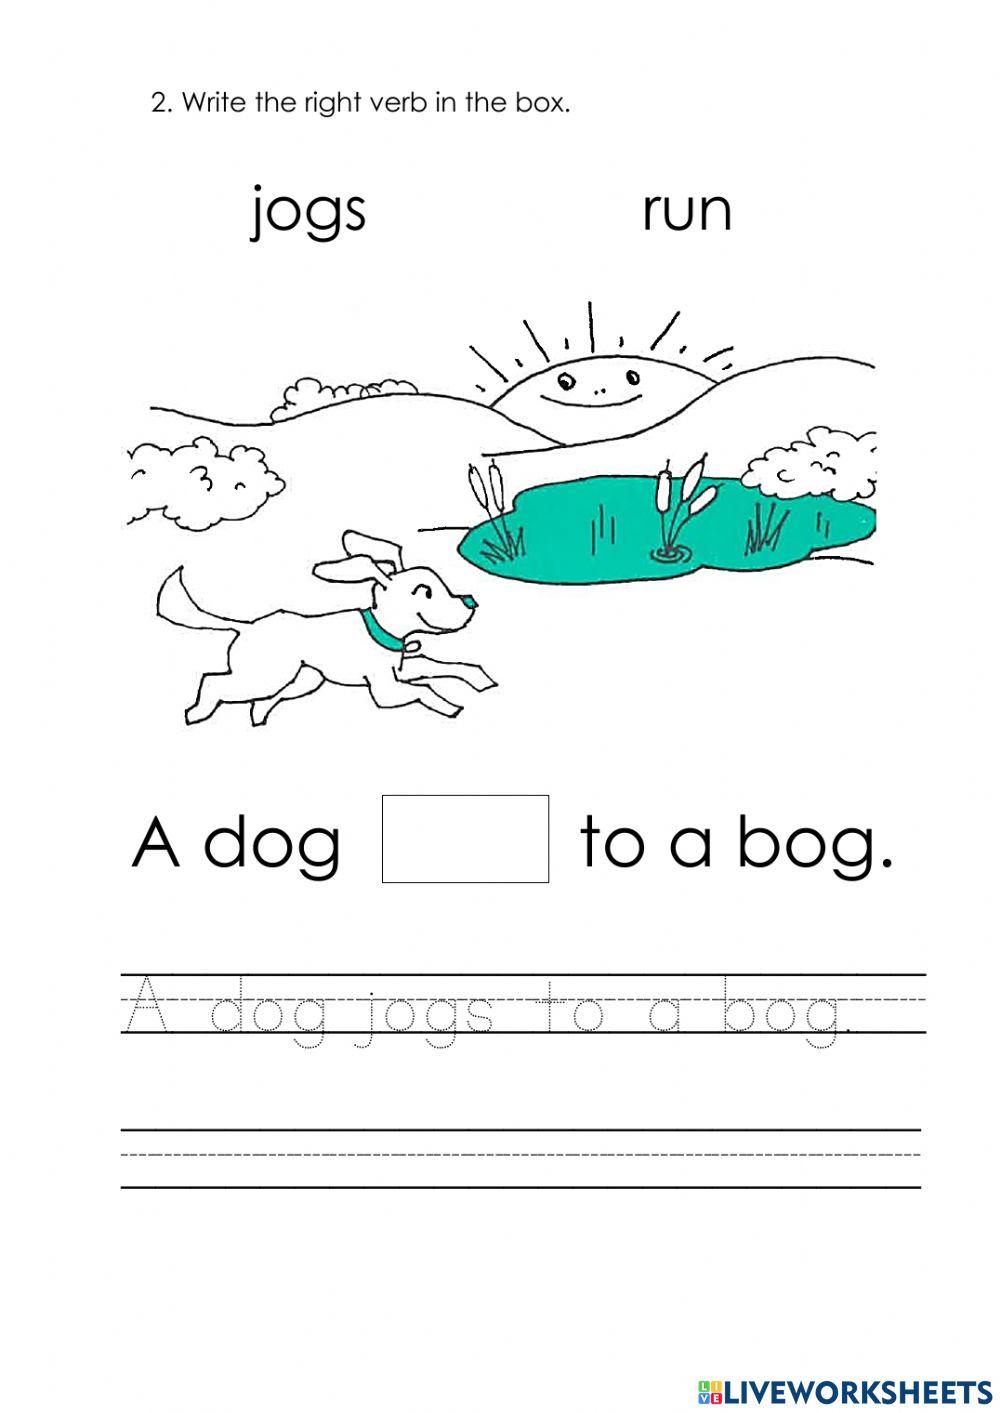 Lesson 7: The Dog in the Fog